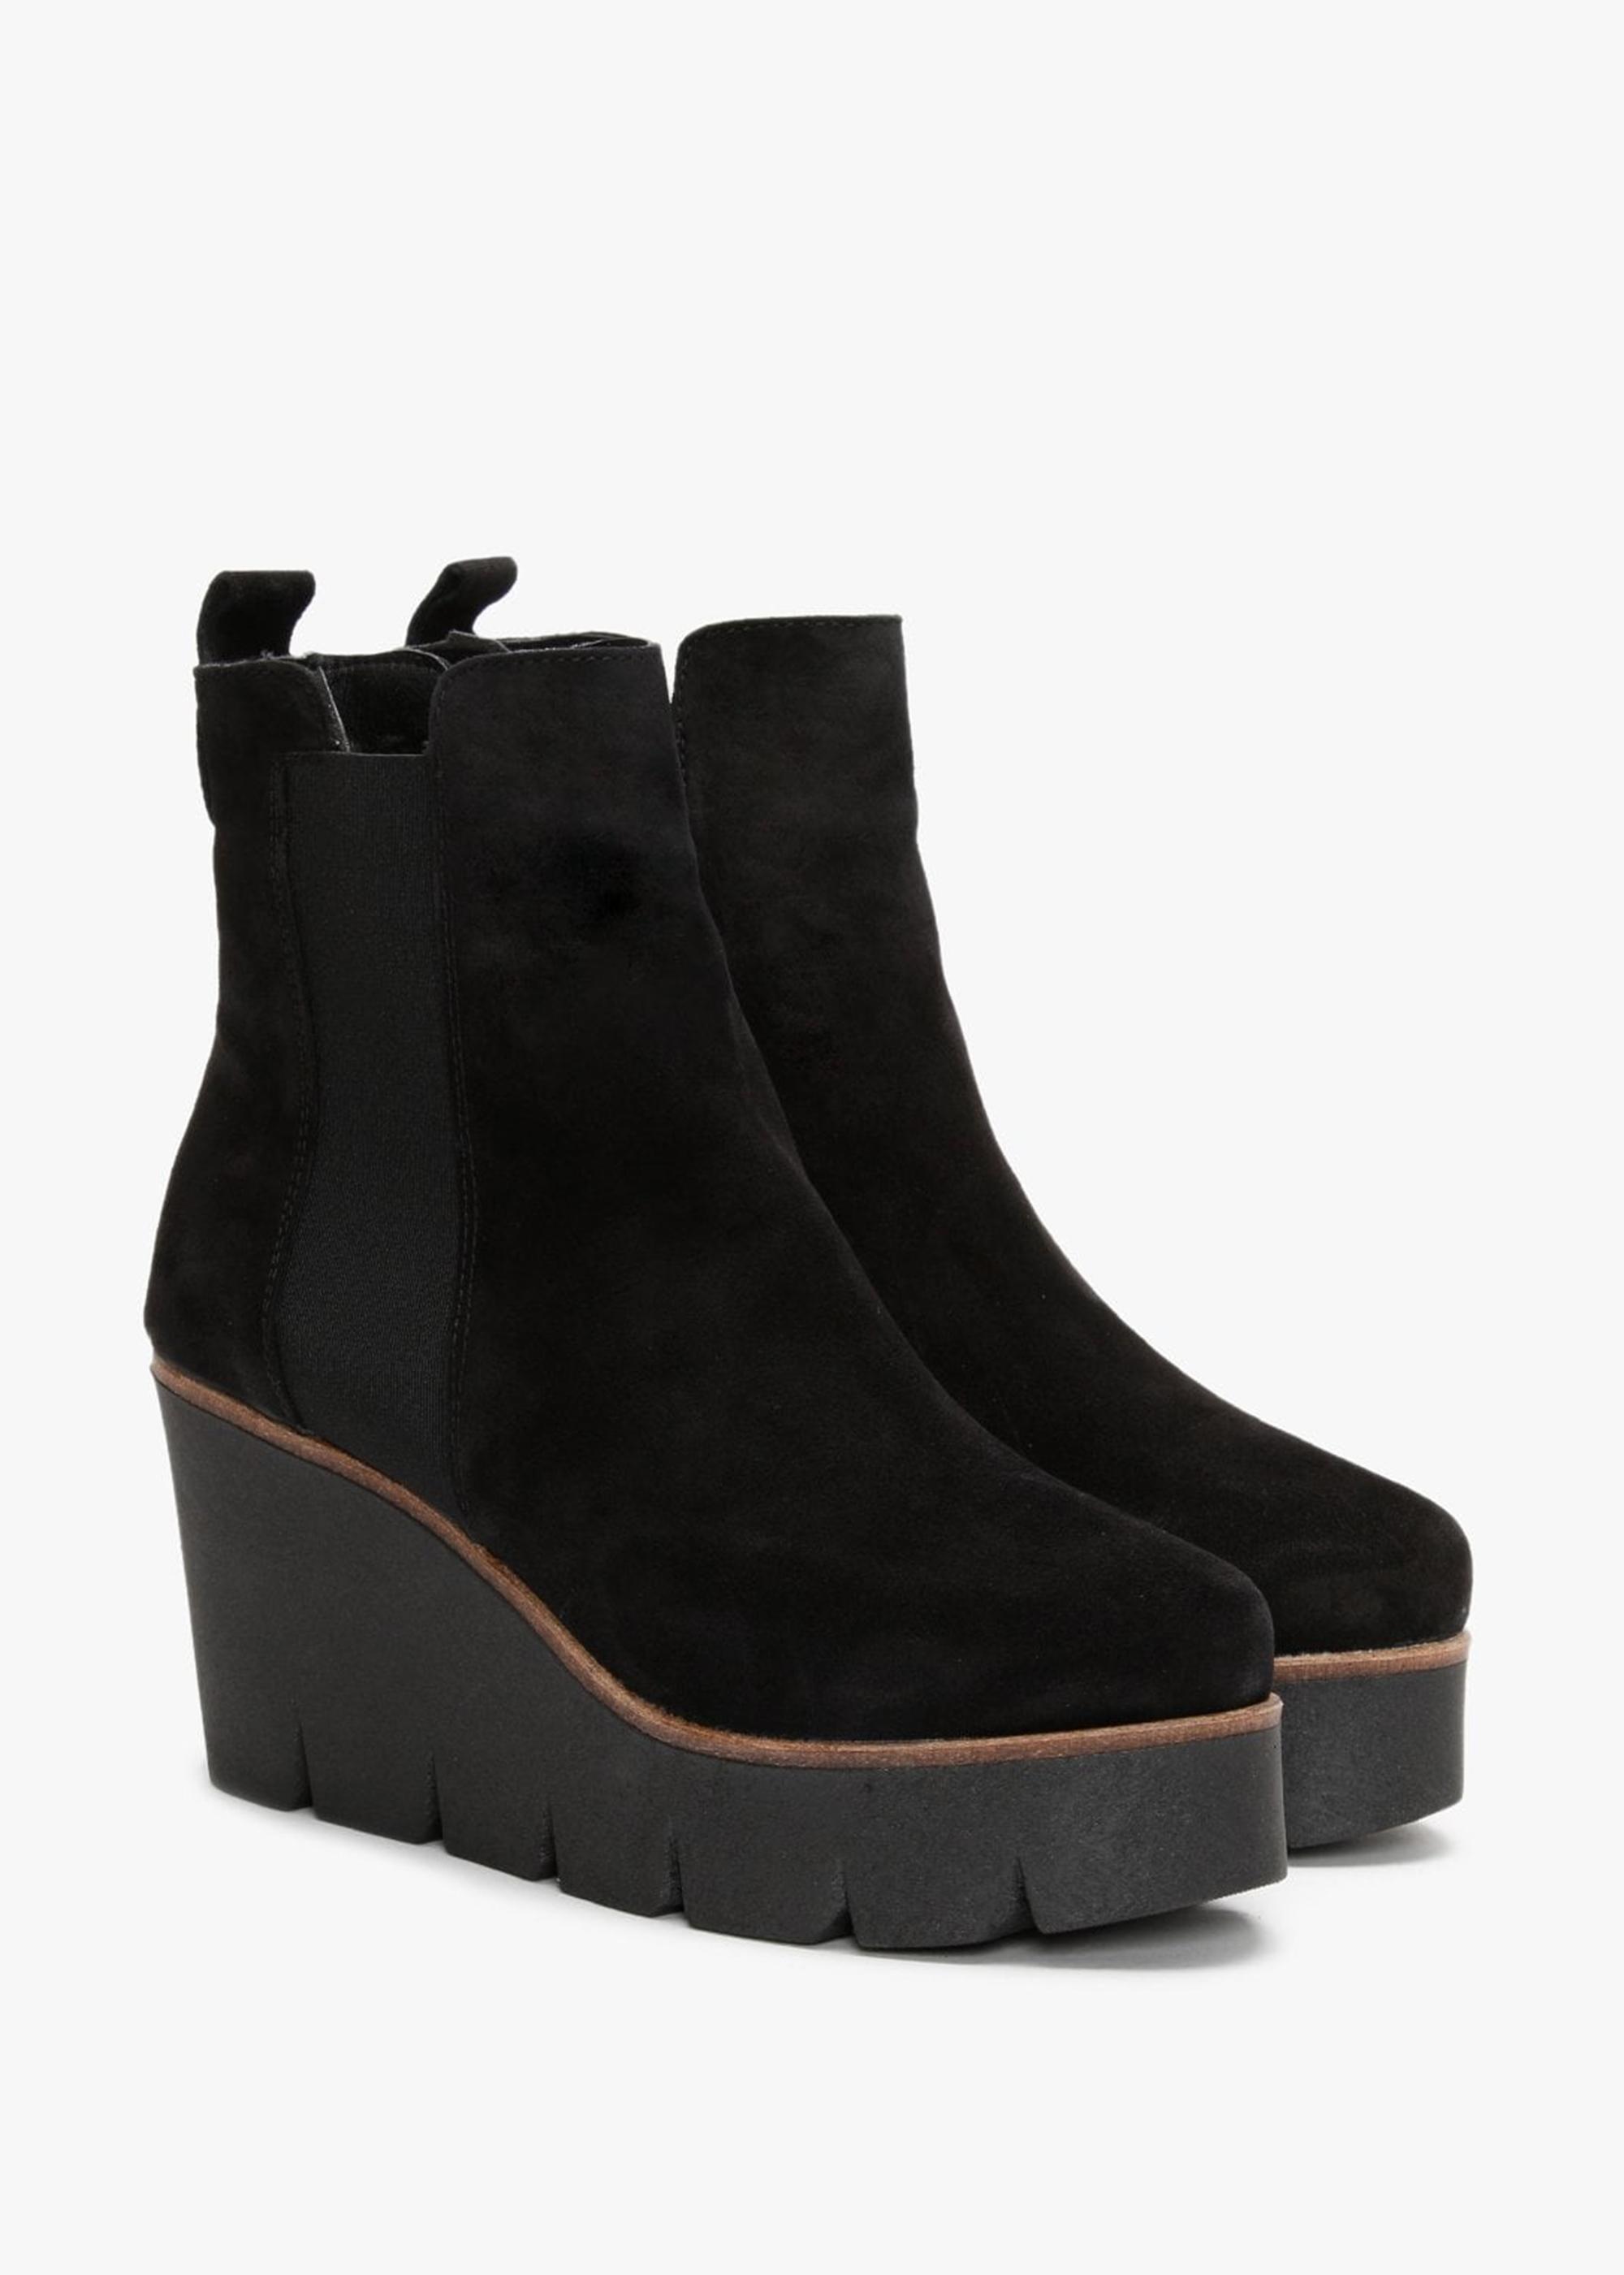 Alpe Alpaca Black Suede Wedge Ankle Boots | Lyst